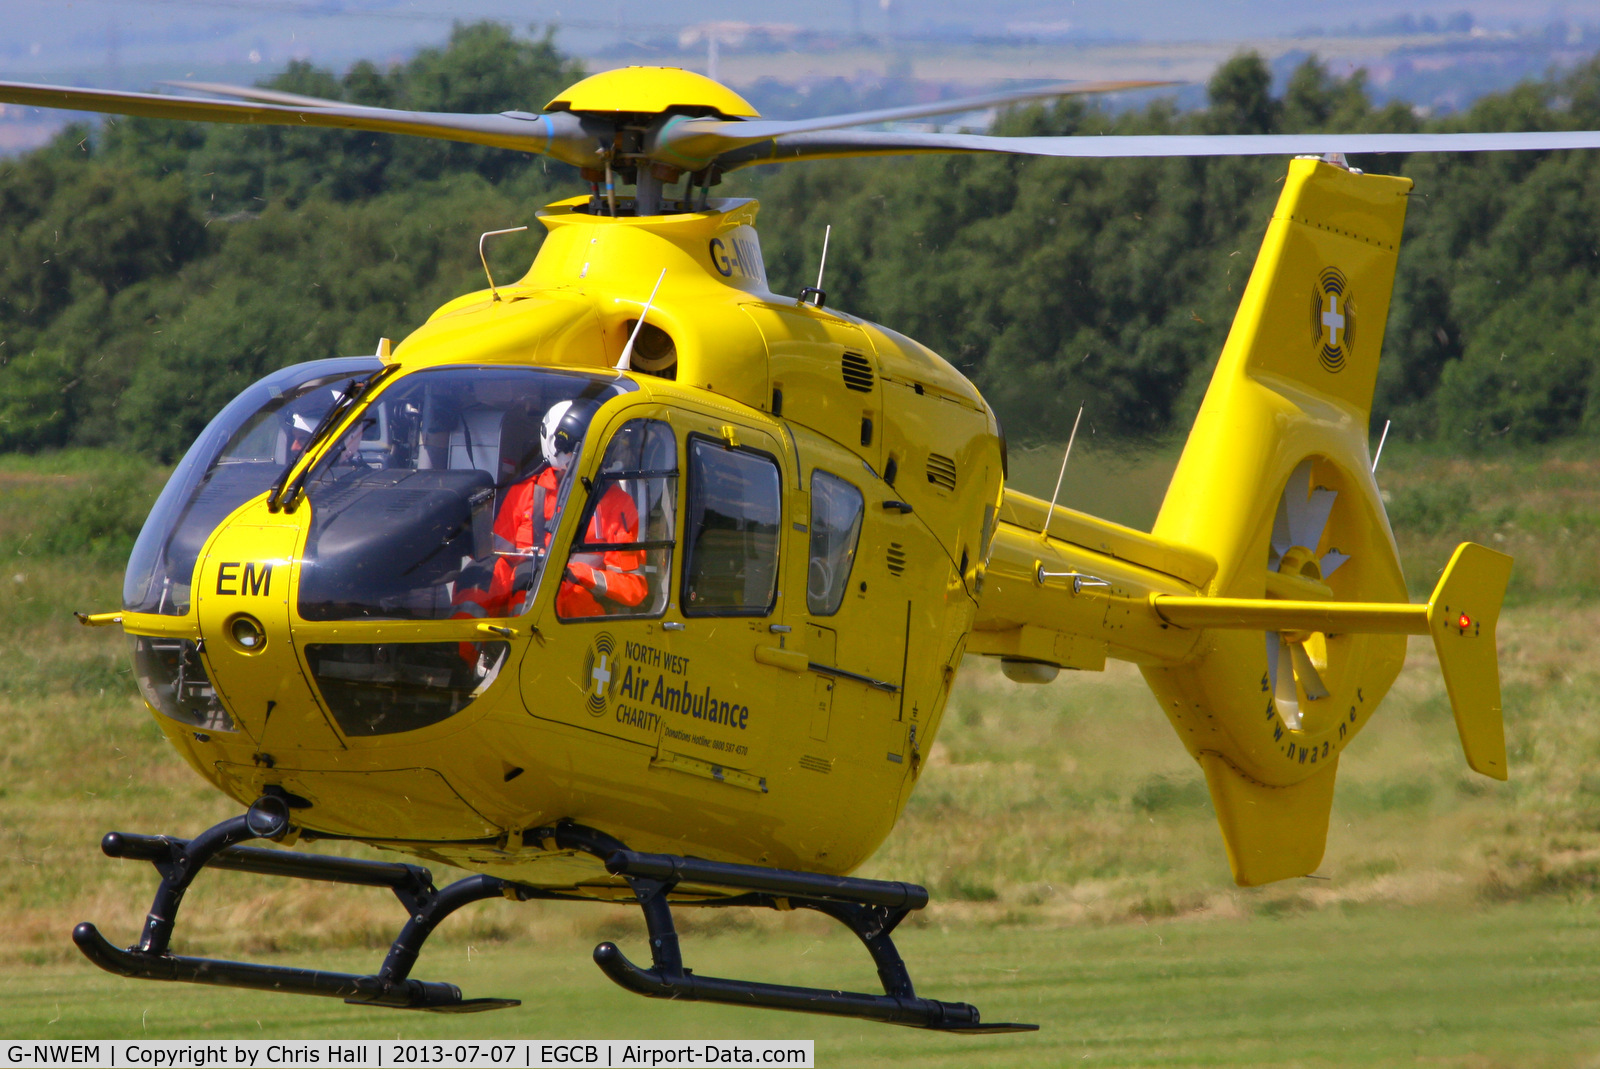 G-NWEM, 2003 Eurocopter EC-135T-2 C/N 0270, at the Barton open day and fly in